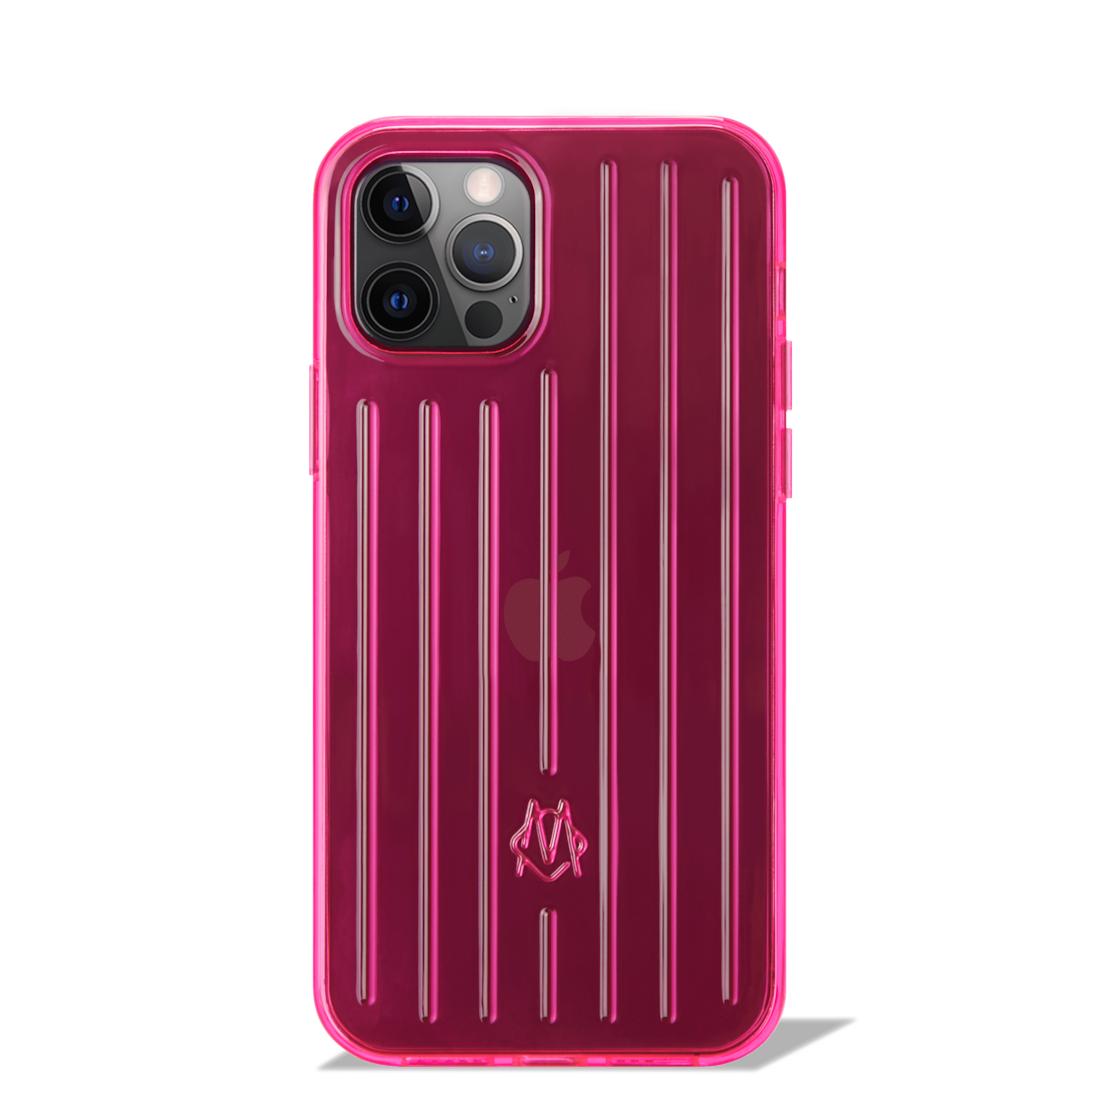 RIMOWA Neon Pink Case For Iphone 12 & 12 Pro | Lyst